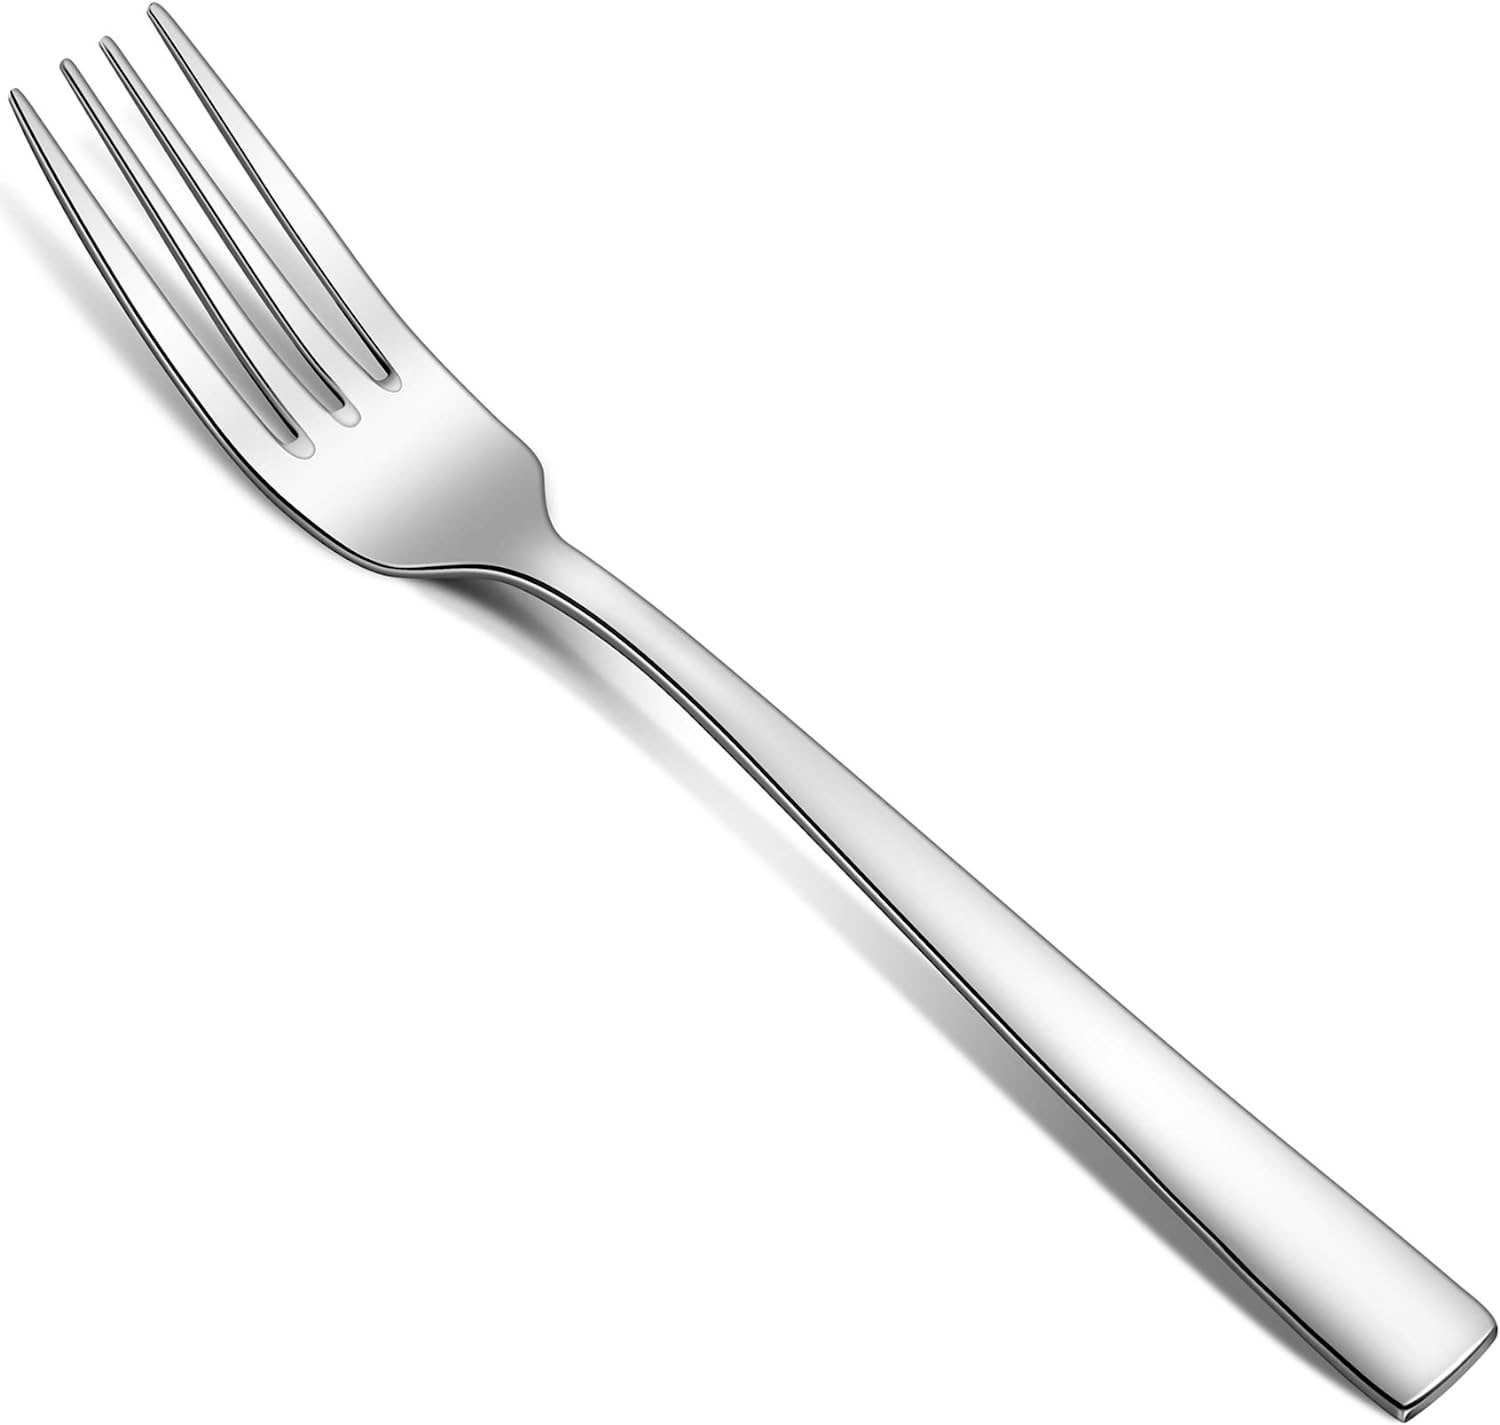 SPOON AND FORK SET